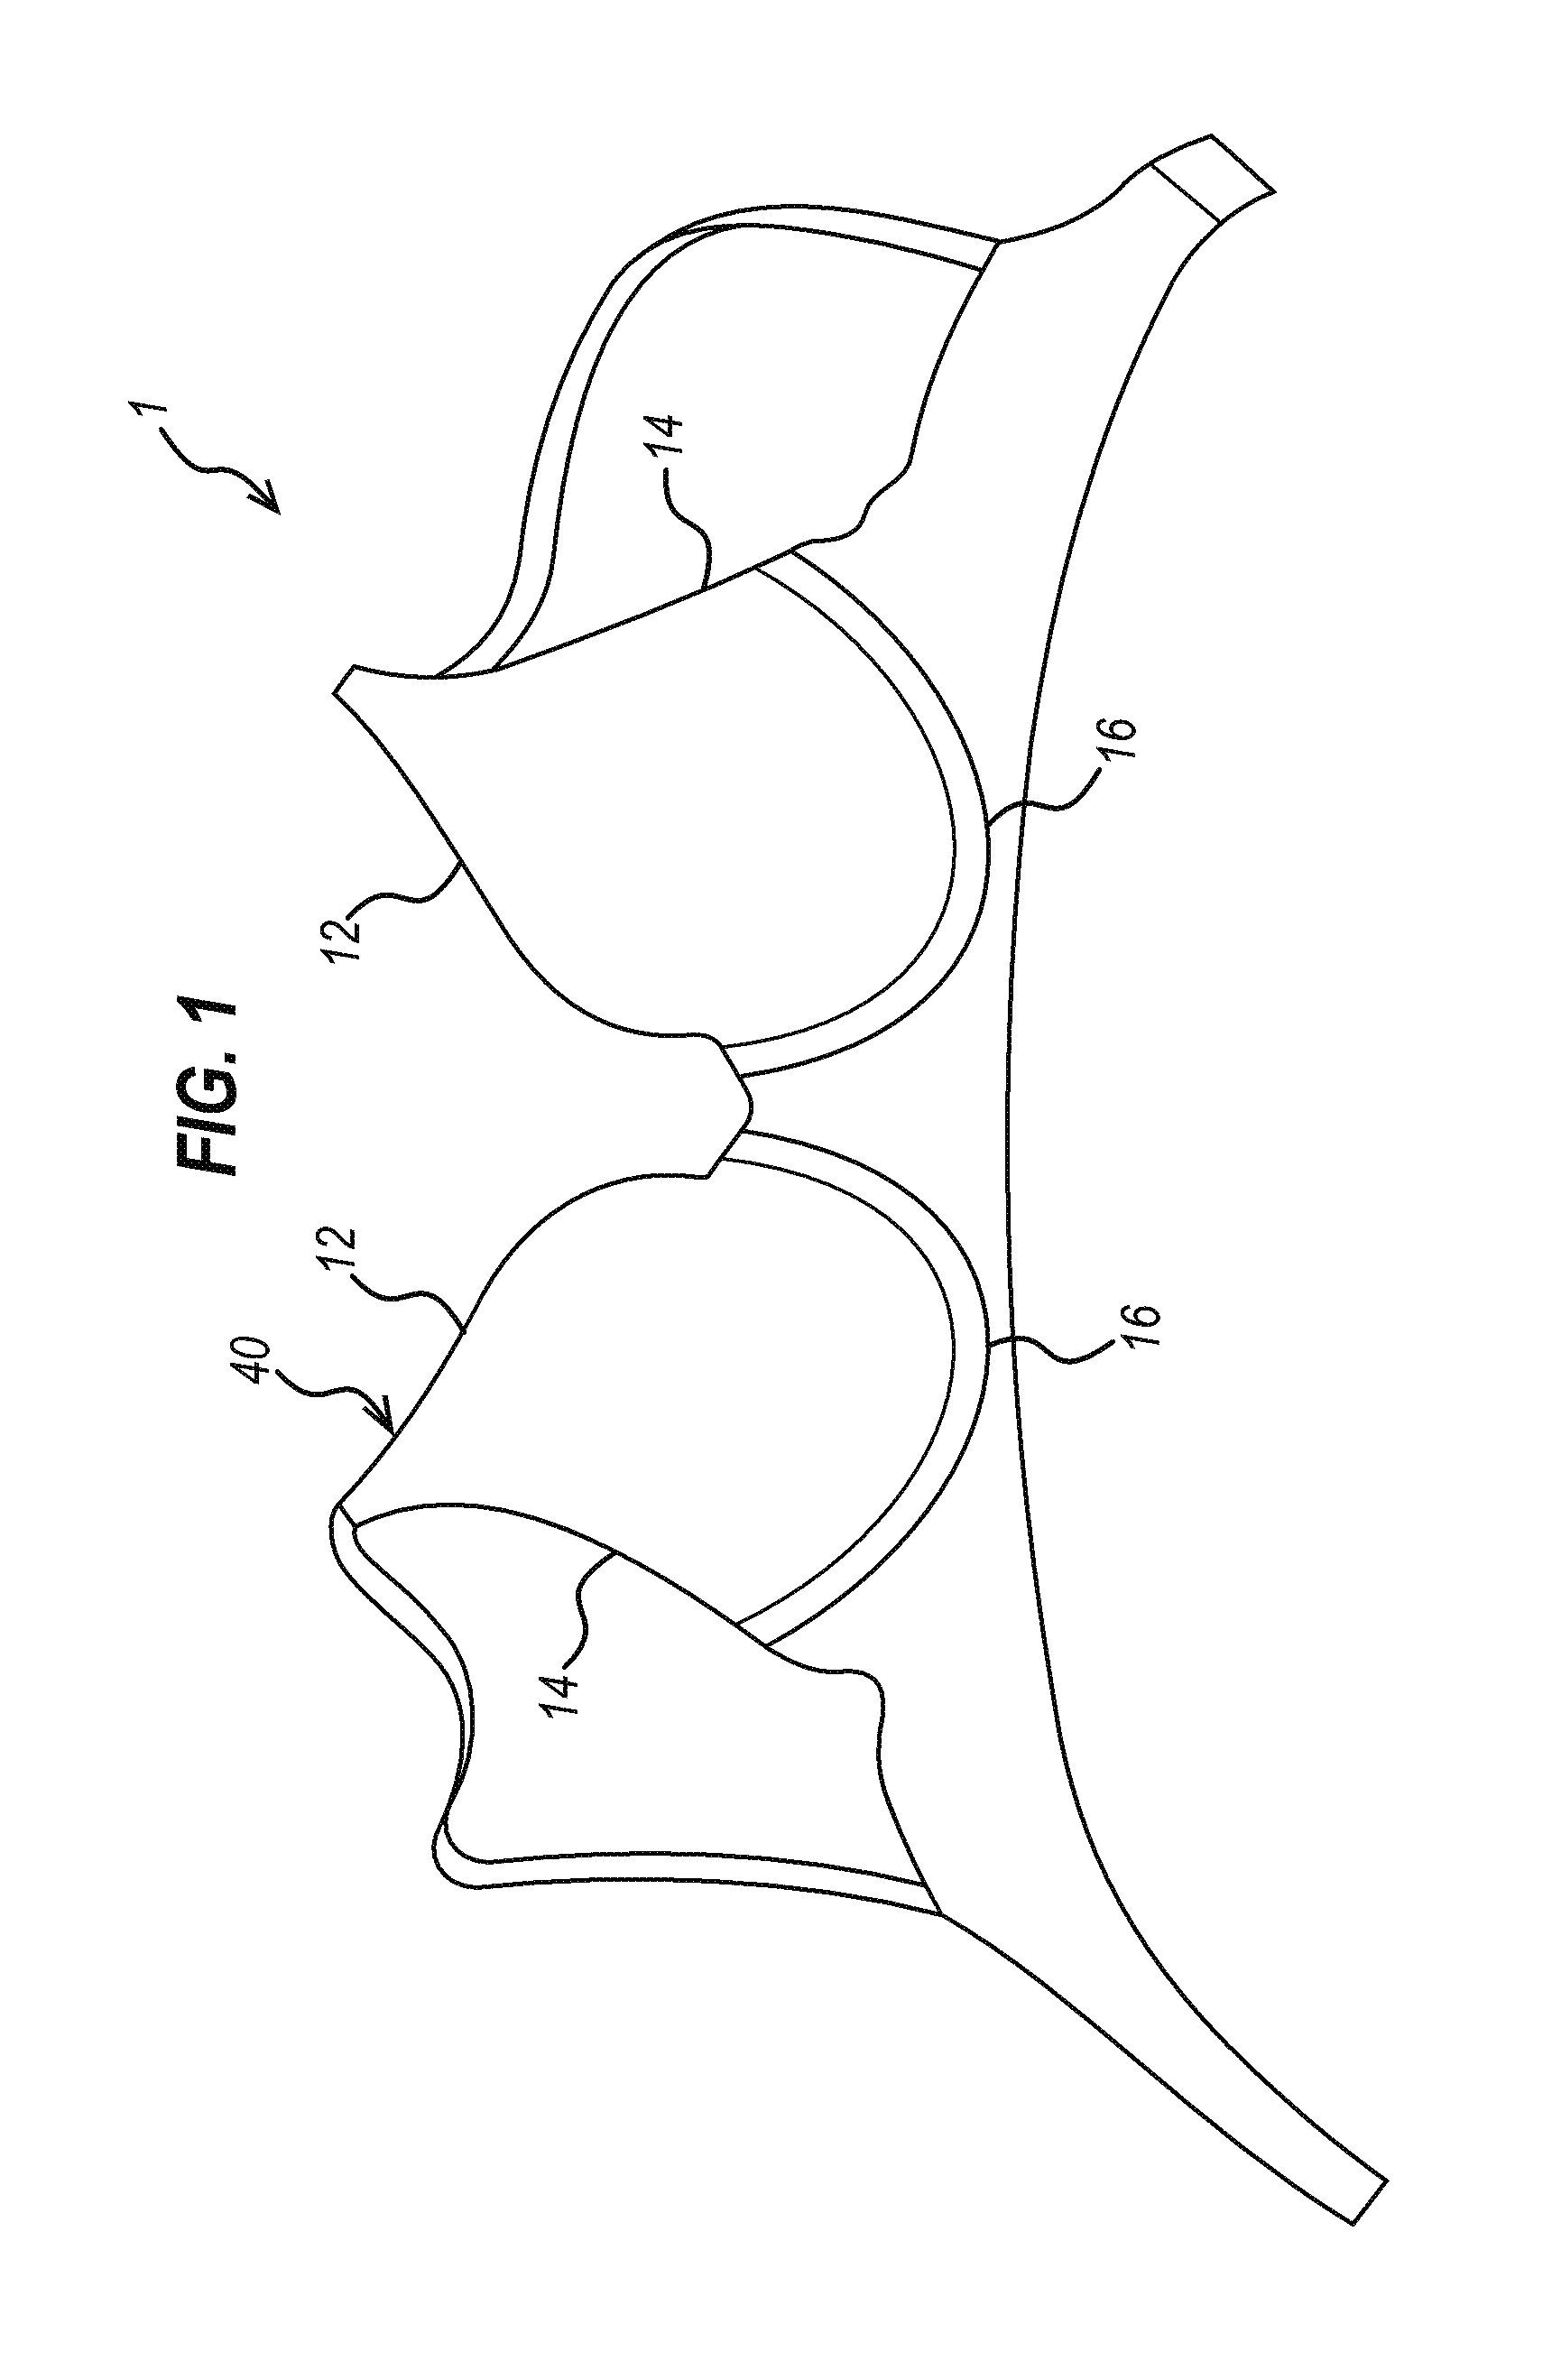 Brassiere cup and method of manufacture